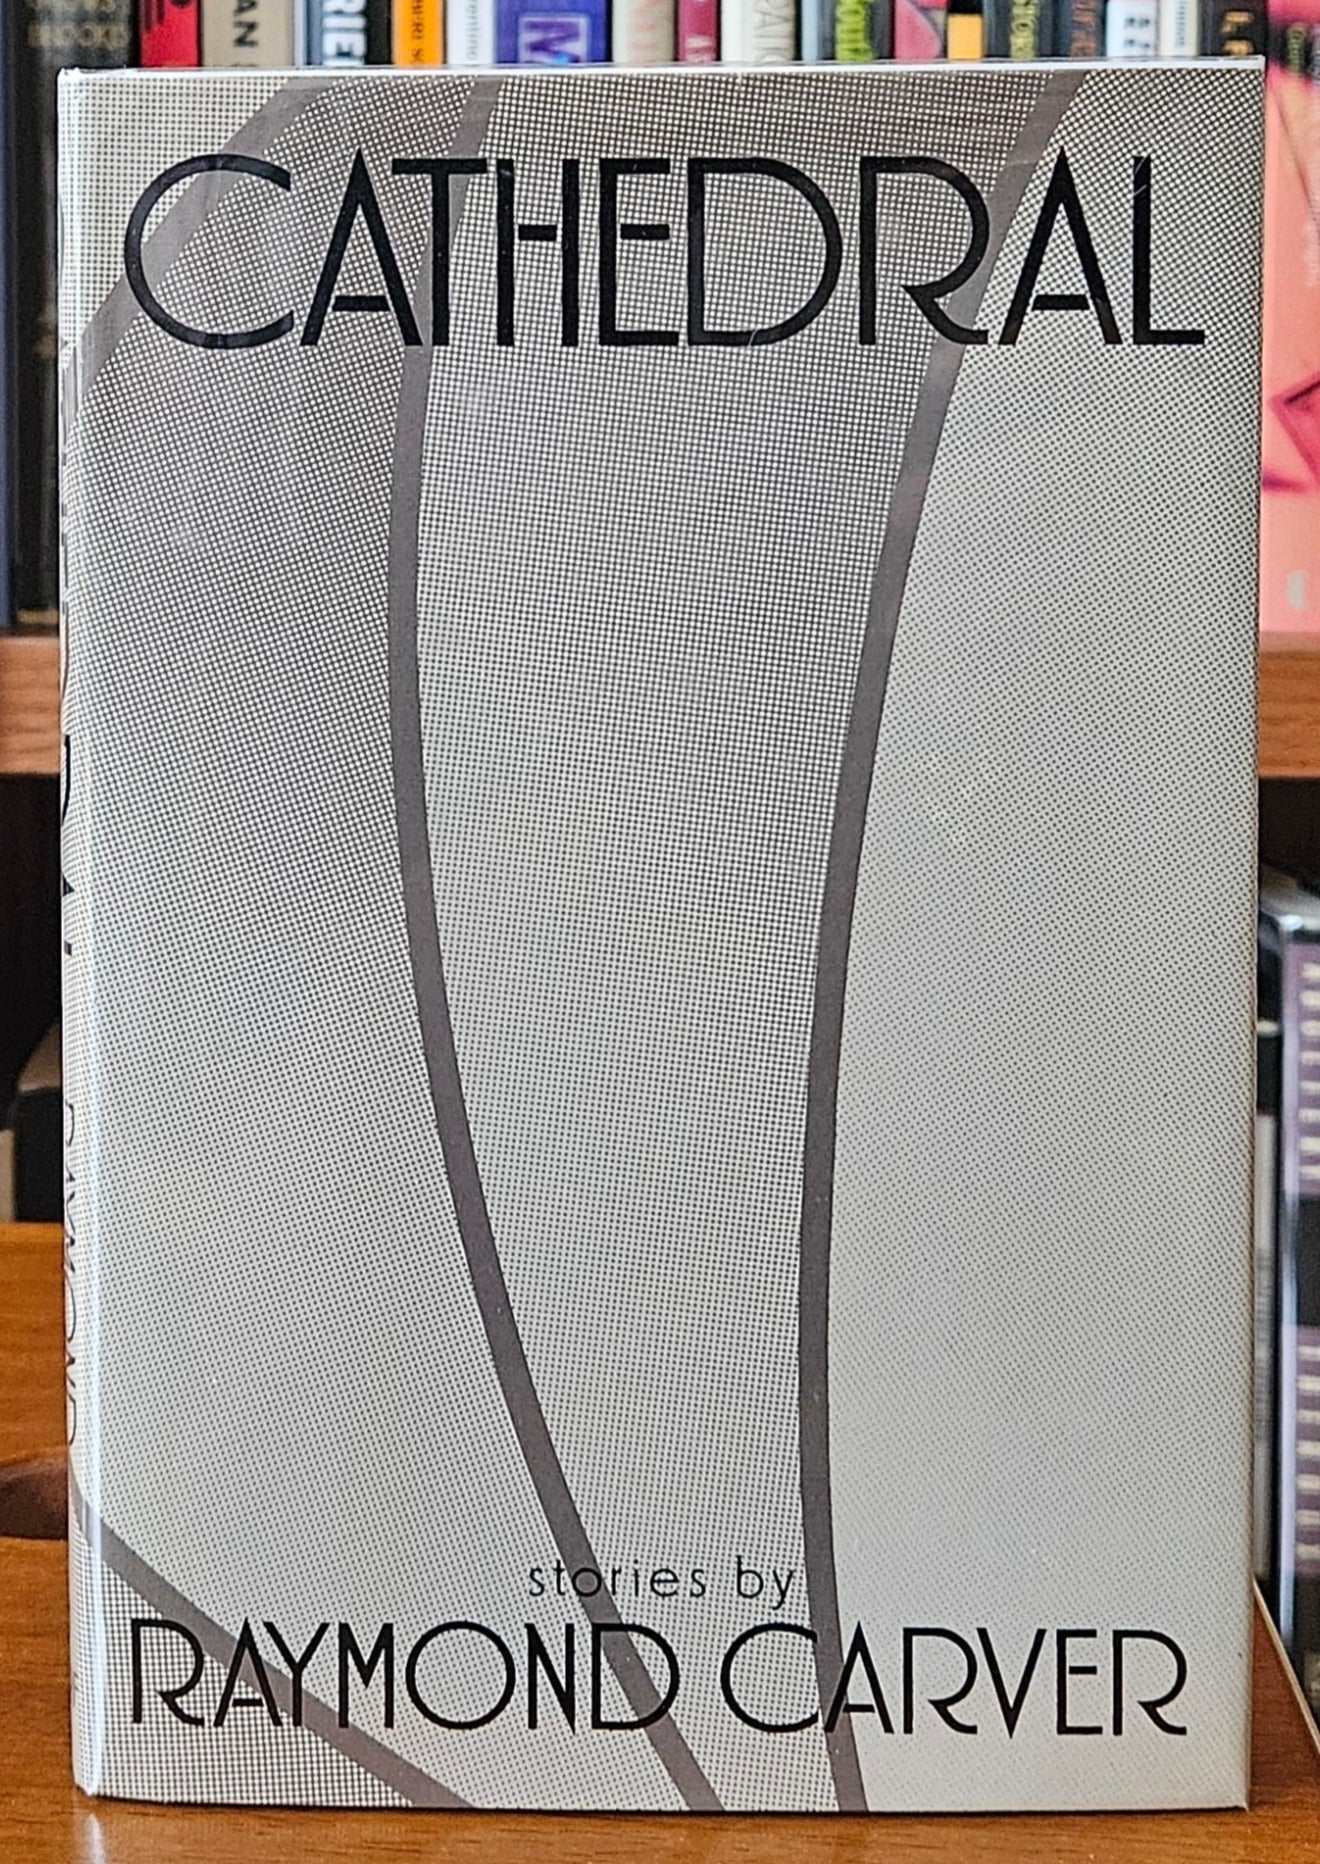 Raymond Carver - Cathedral